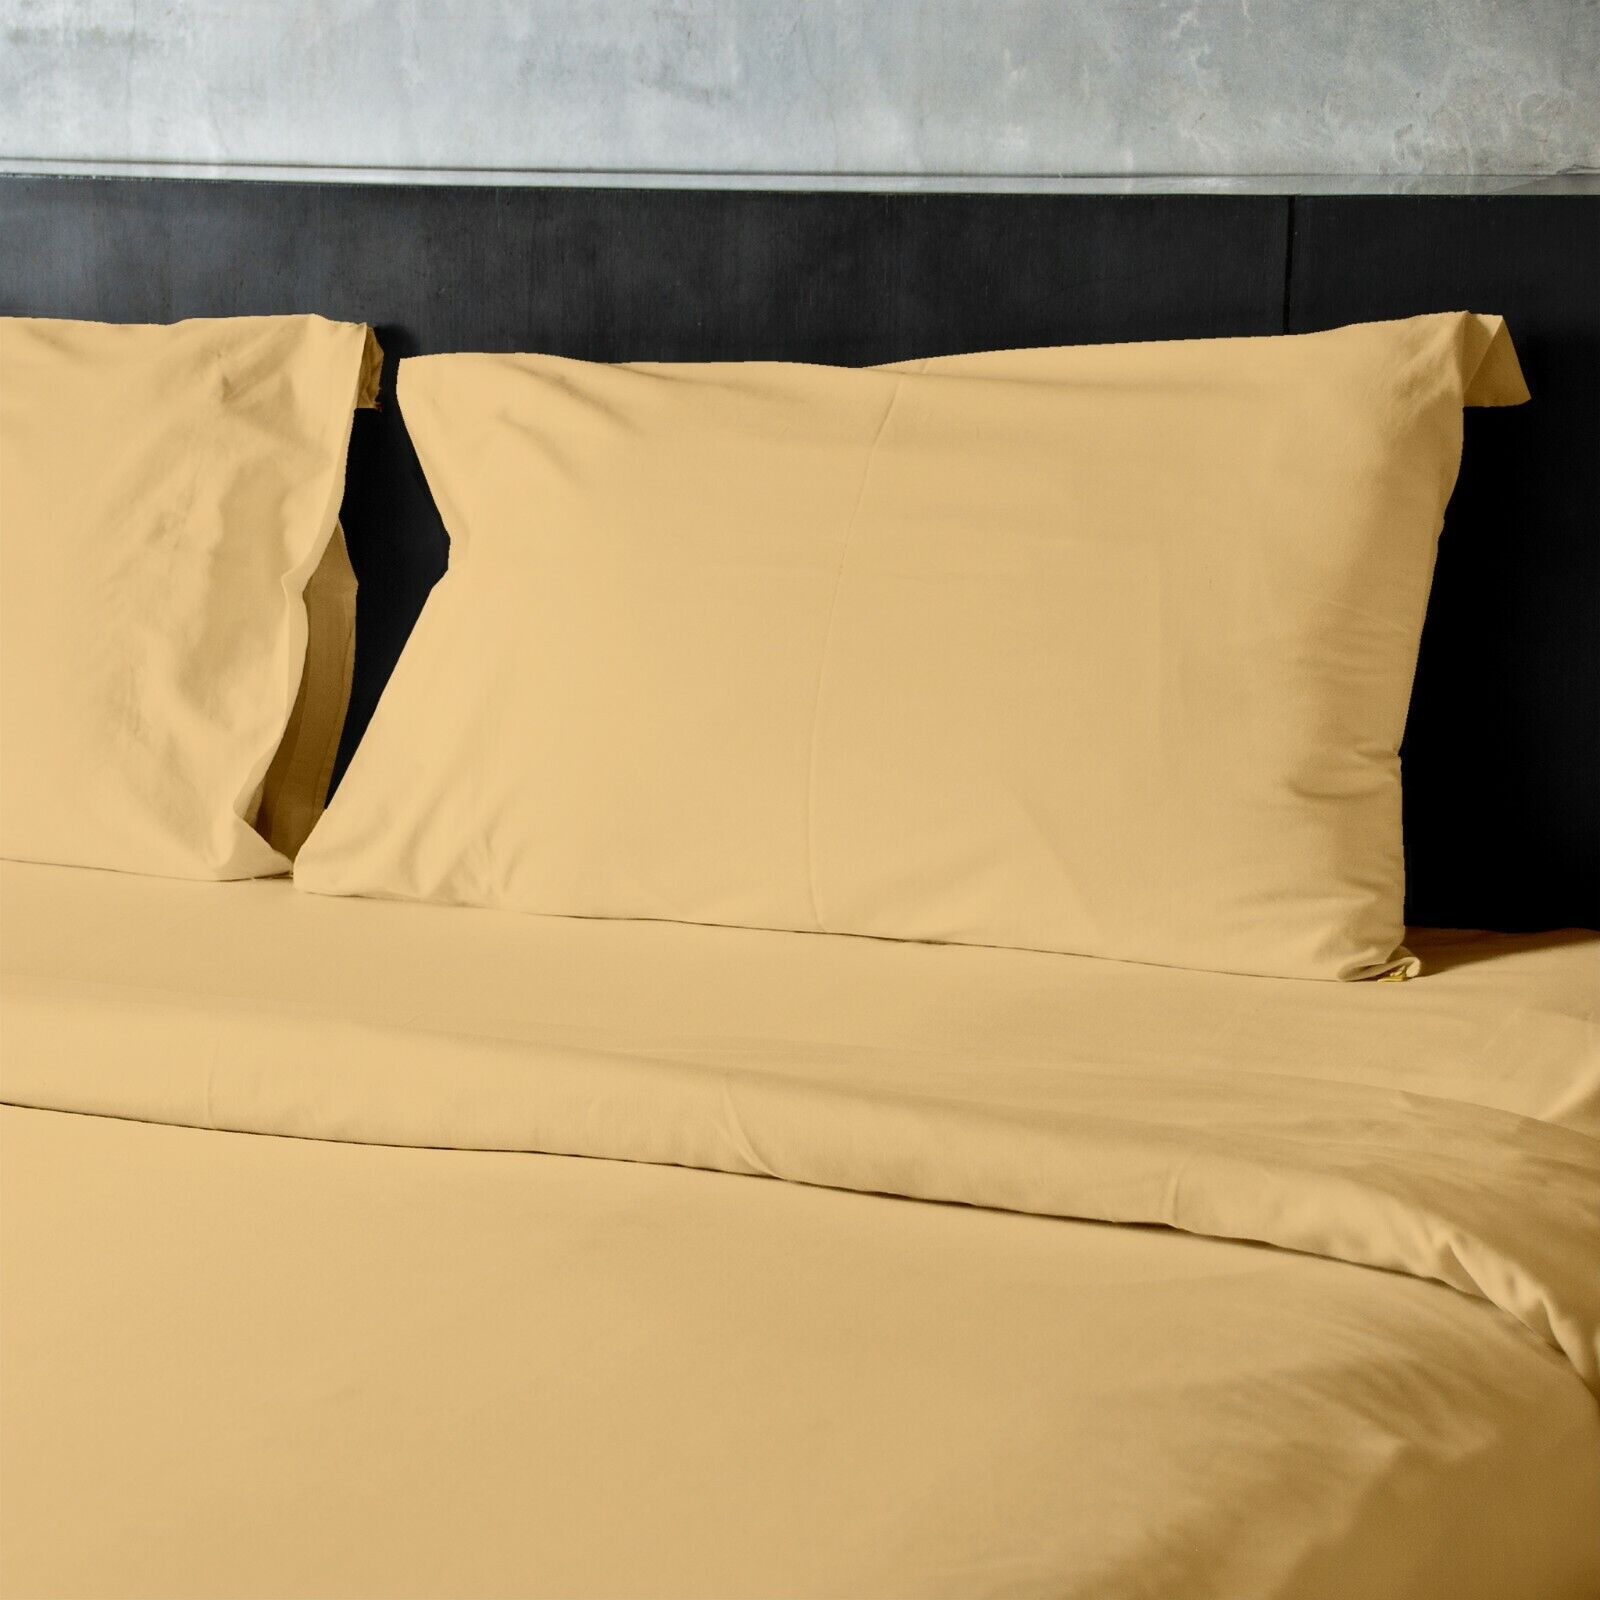 BED SHEETS 1800 THREAD COUNT BAMBOO COTTON FEEL KING QUEEN FOR DEEP POCKETS